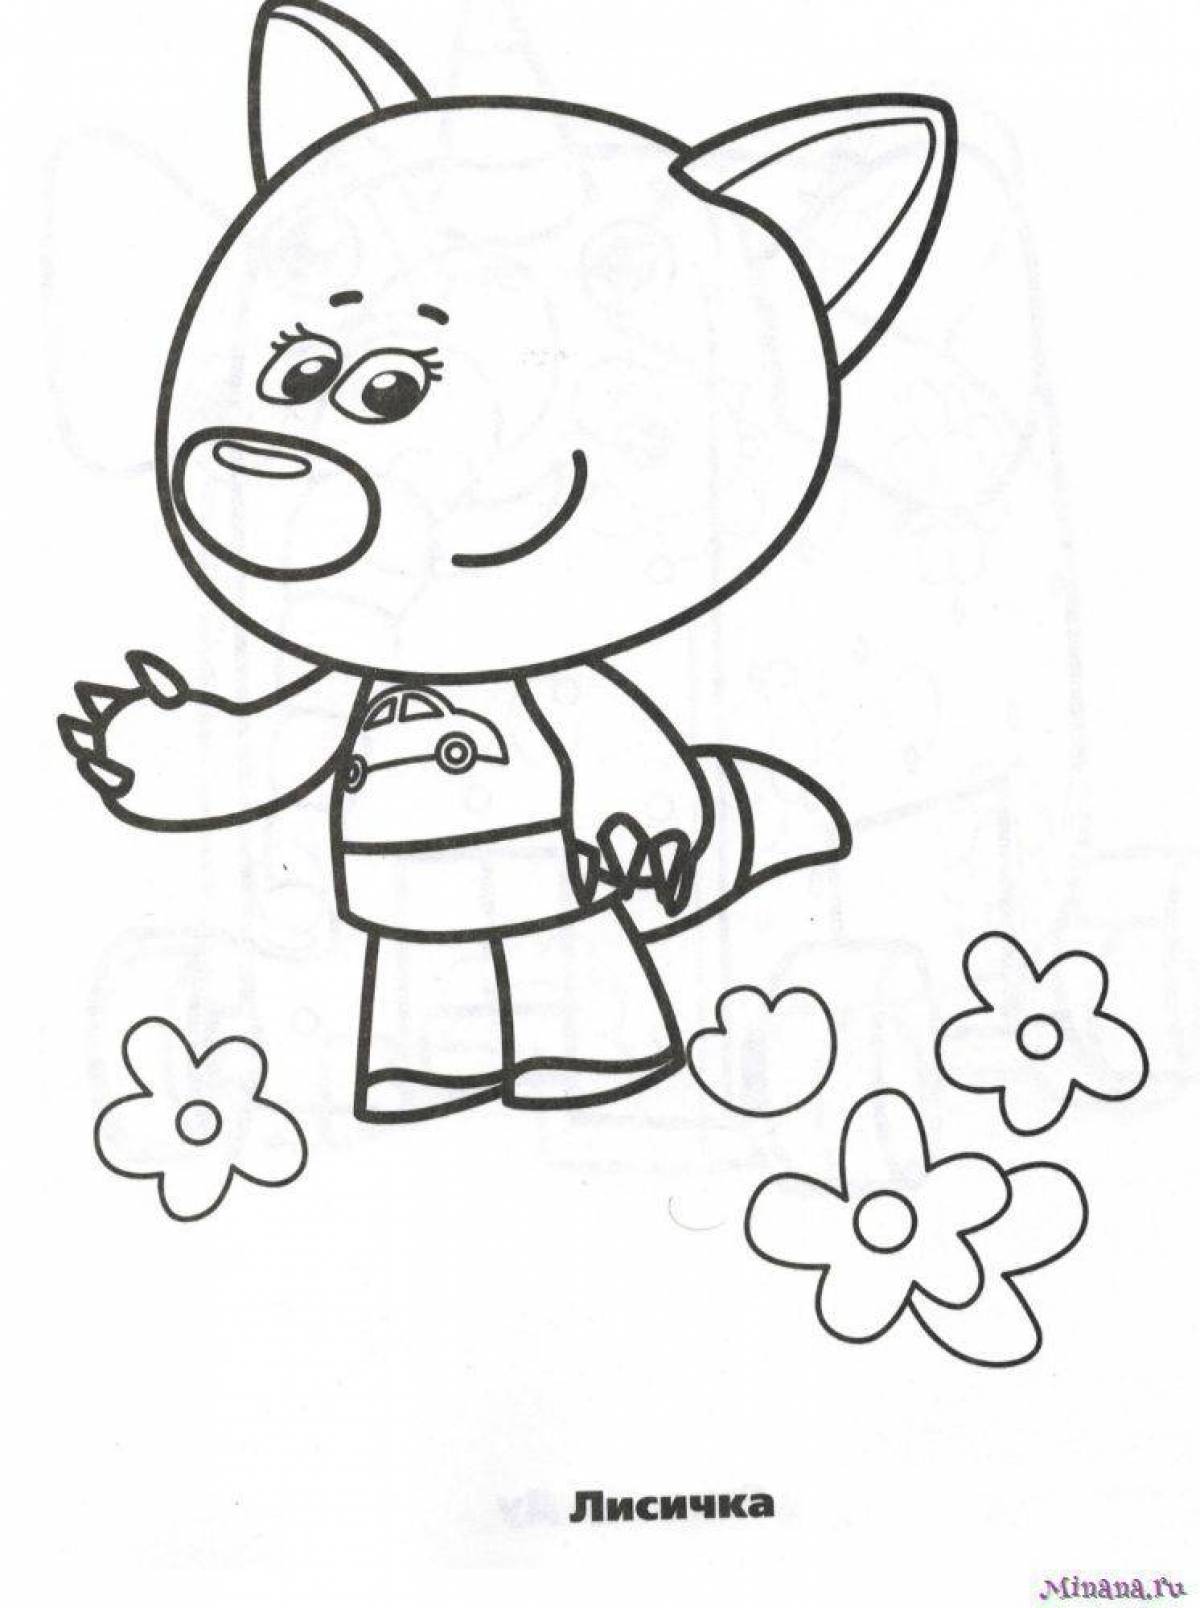 Fun coloring pages with bears